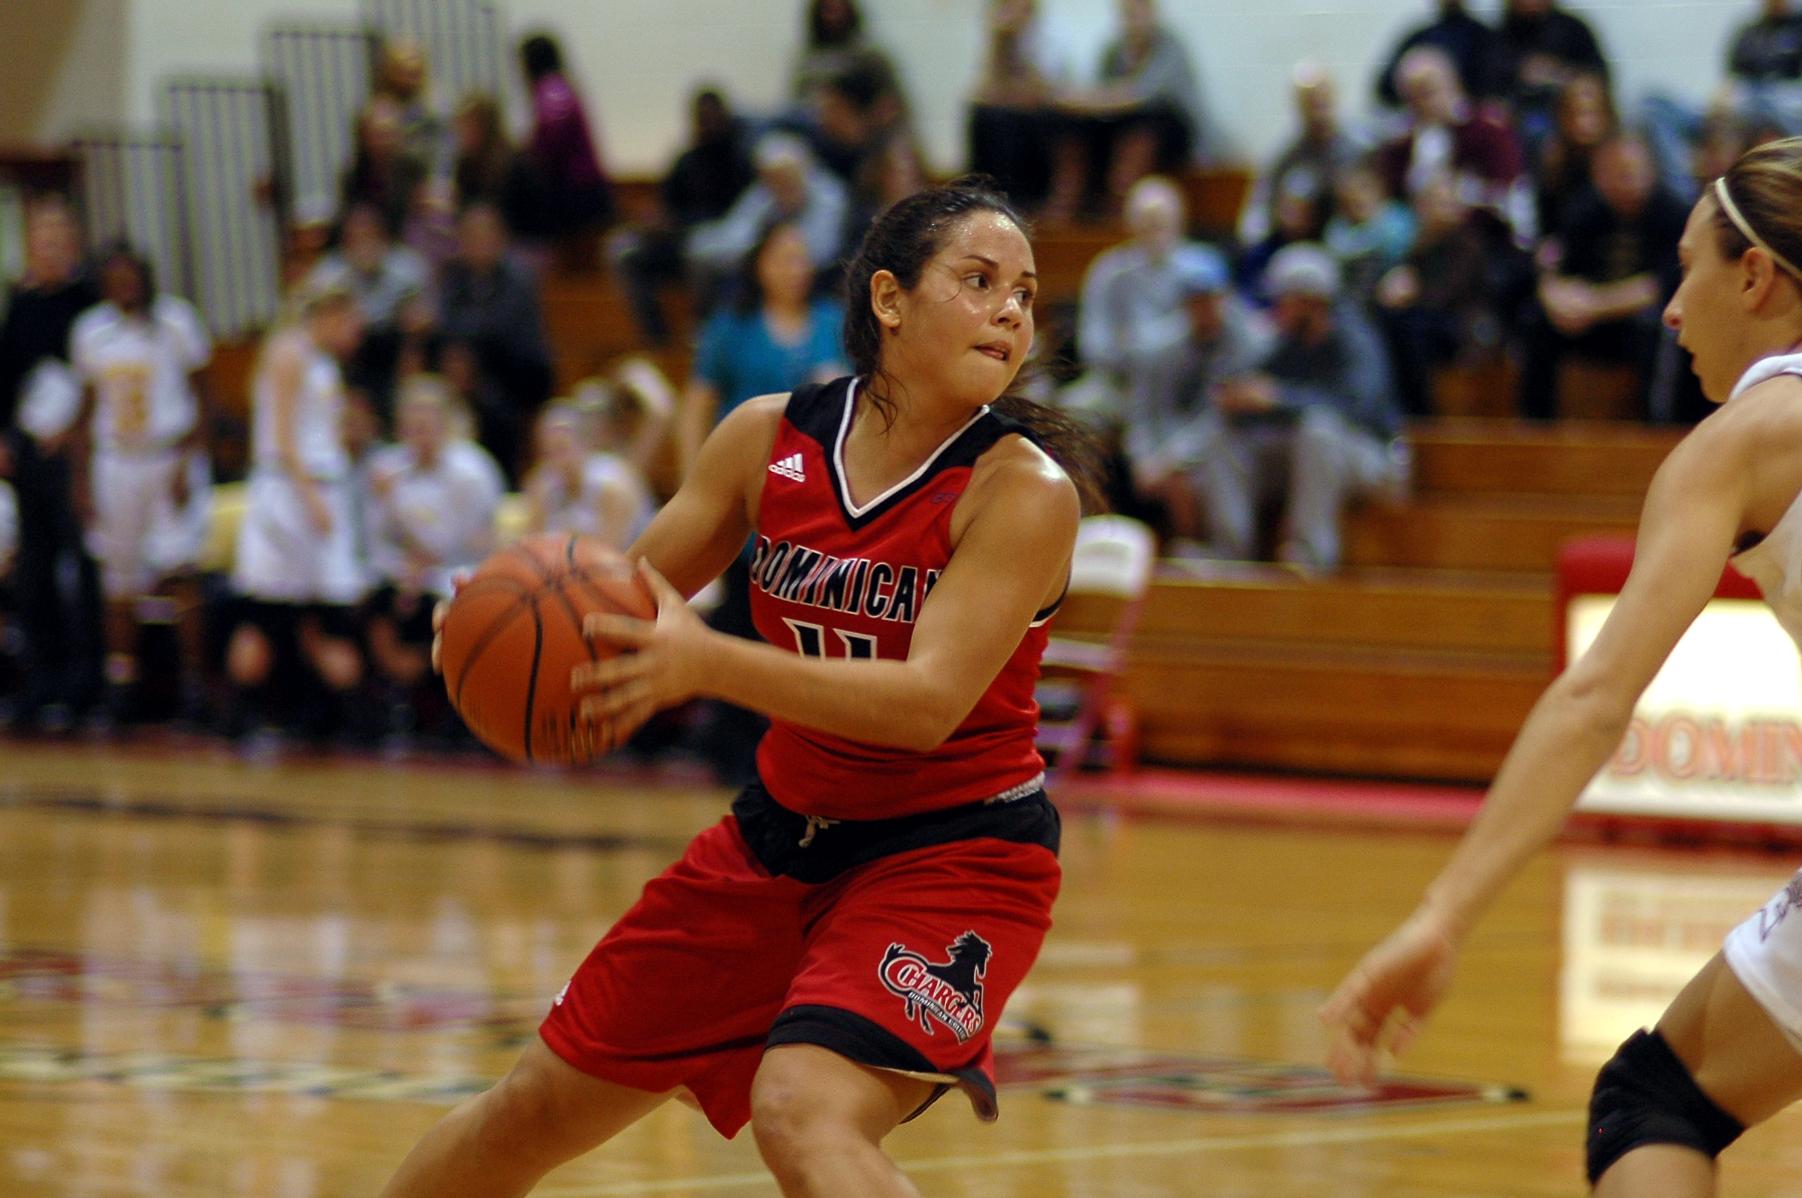 LADY CHARGERS GET BACK INTO WIN COLUMN AFTER WIN OVER FELICIAN